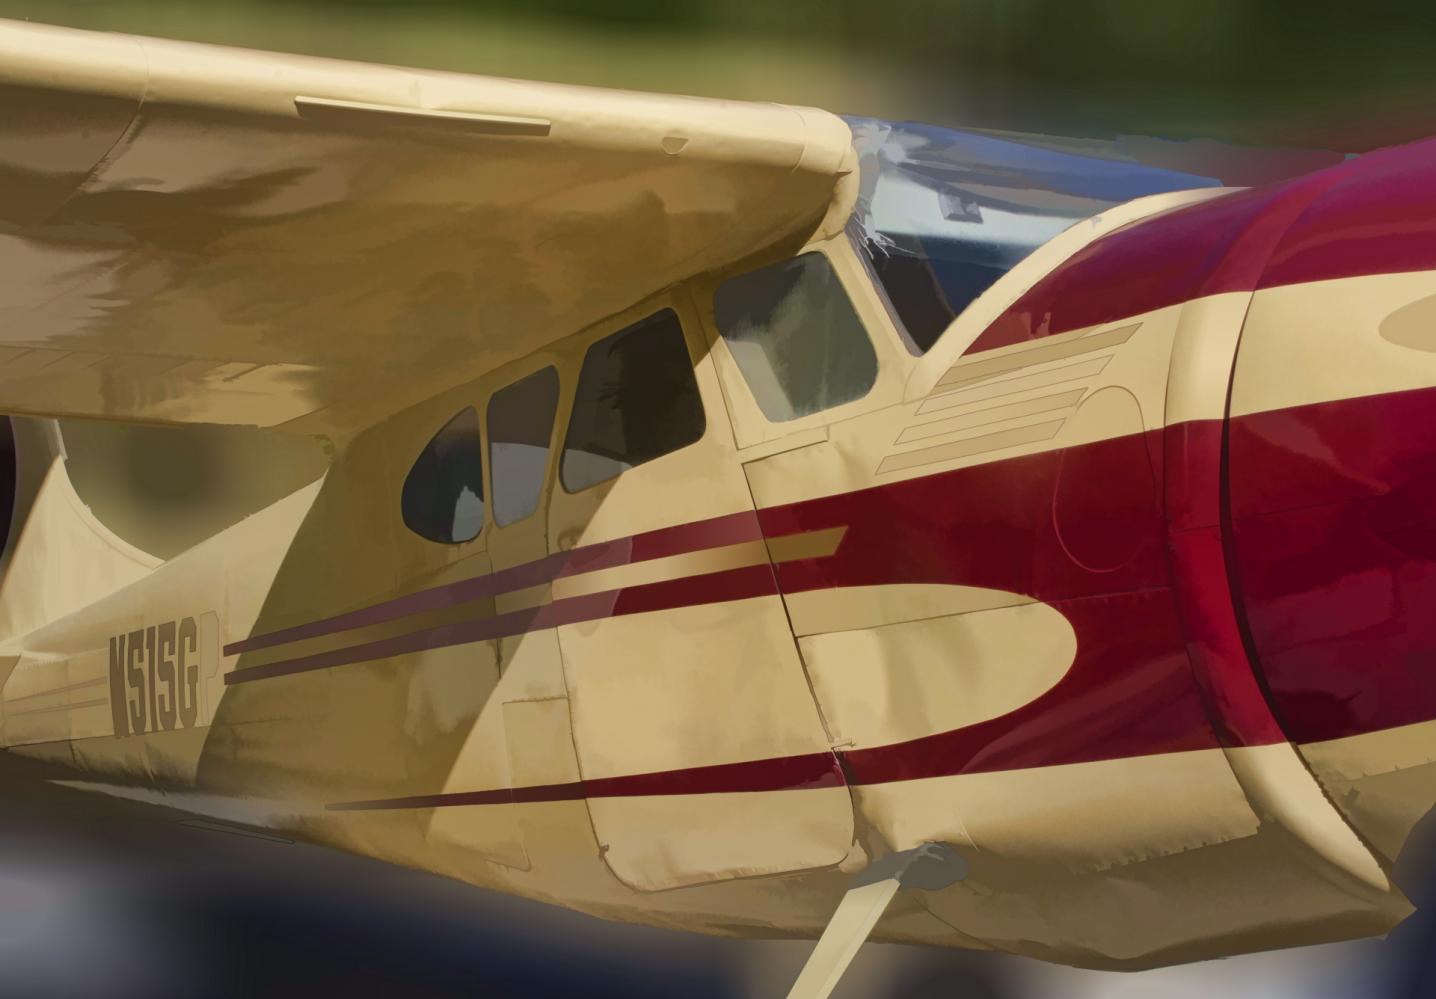 What Are the Advantages and Disadvantages of Owning a Cessna Aircraft?